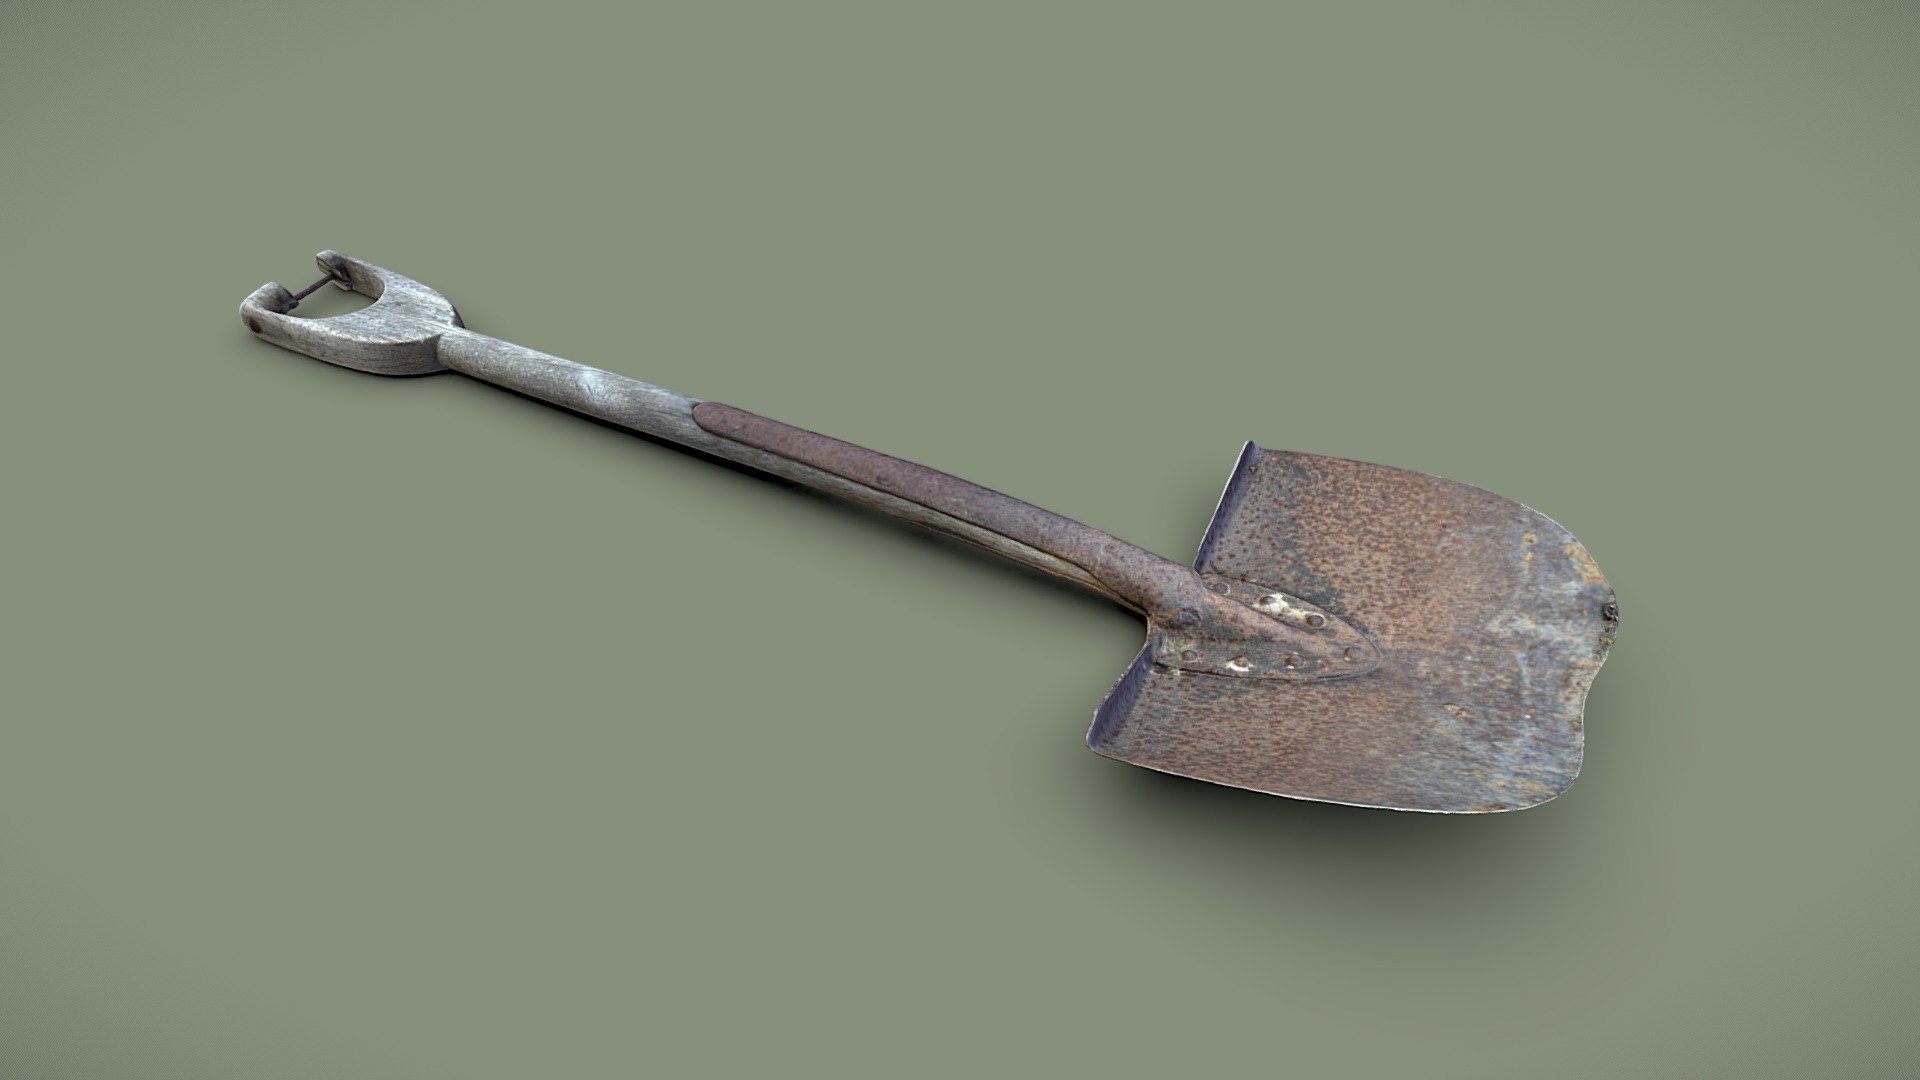 A Rusty old shovel.

Model includes 8k Diffuse map, 4k normal map and 4k Ambien occlusion map

You can also buy the whole pack from link below

Old farming pack

Photos taken with D5300 + 35mm Nikkor 3d model